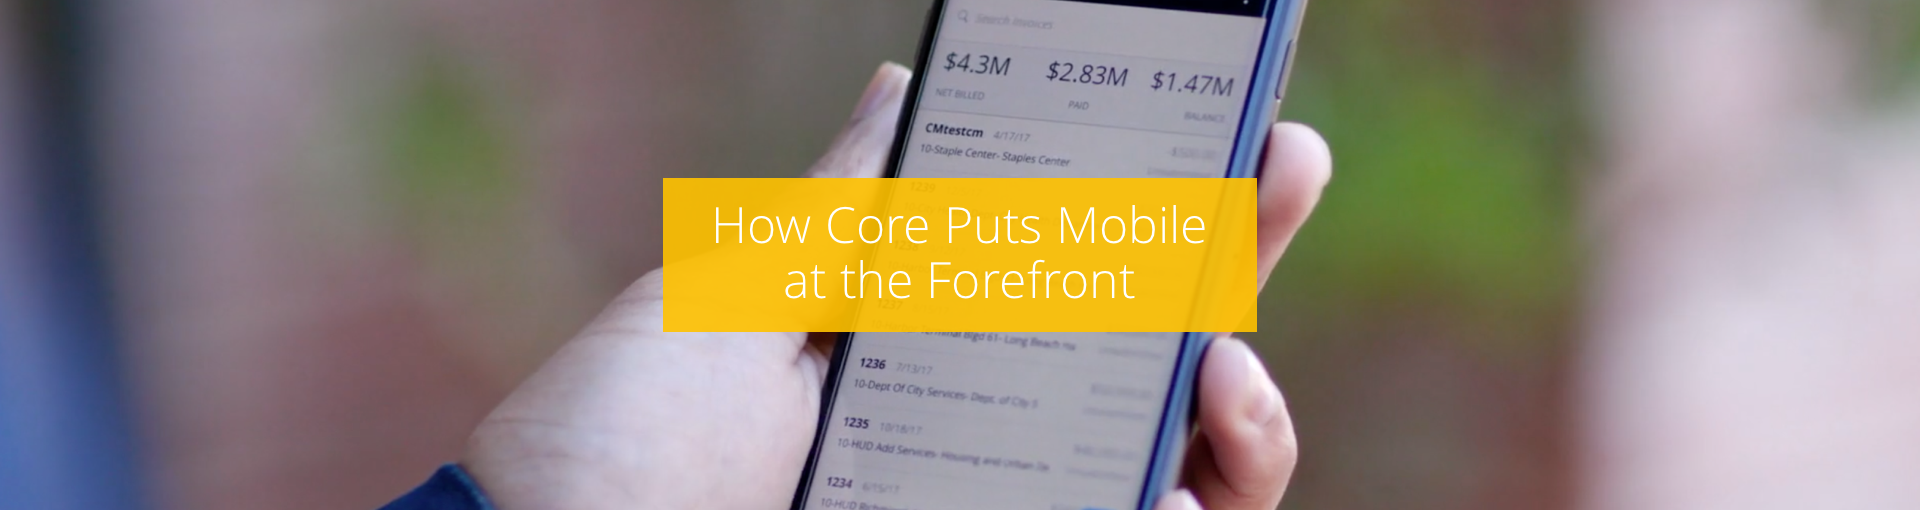 How CORE Puts Mobile at the Forefront Featured Image